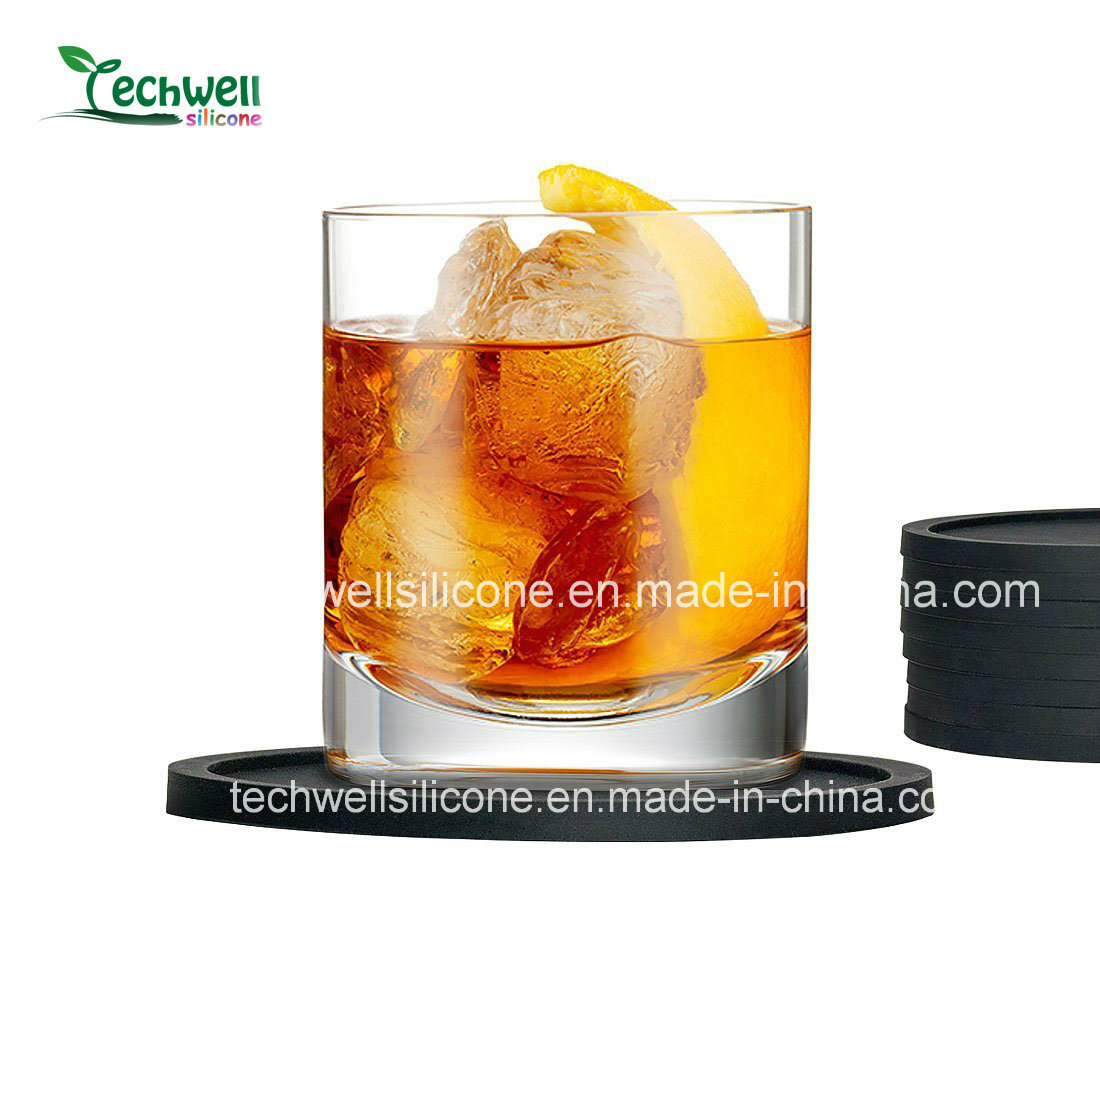 /proimages/2f0j00wNzQOWtKkBoe/us-and-europe-hot-sell-silicone-drink-coaster.jpg